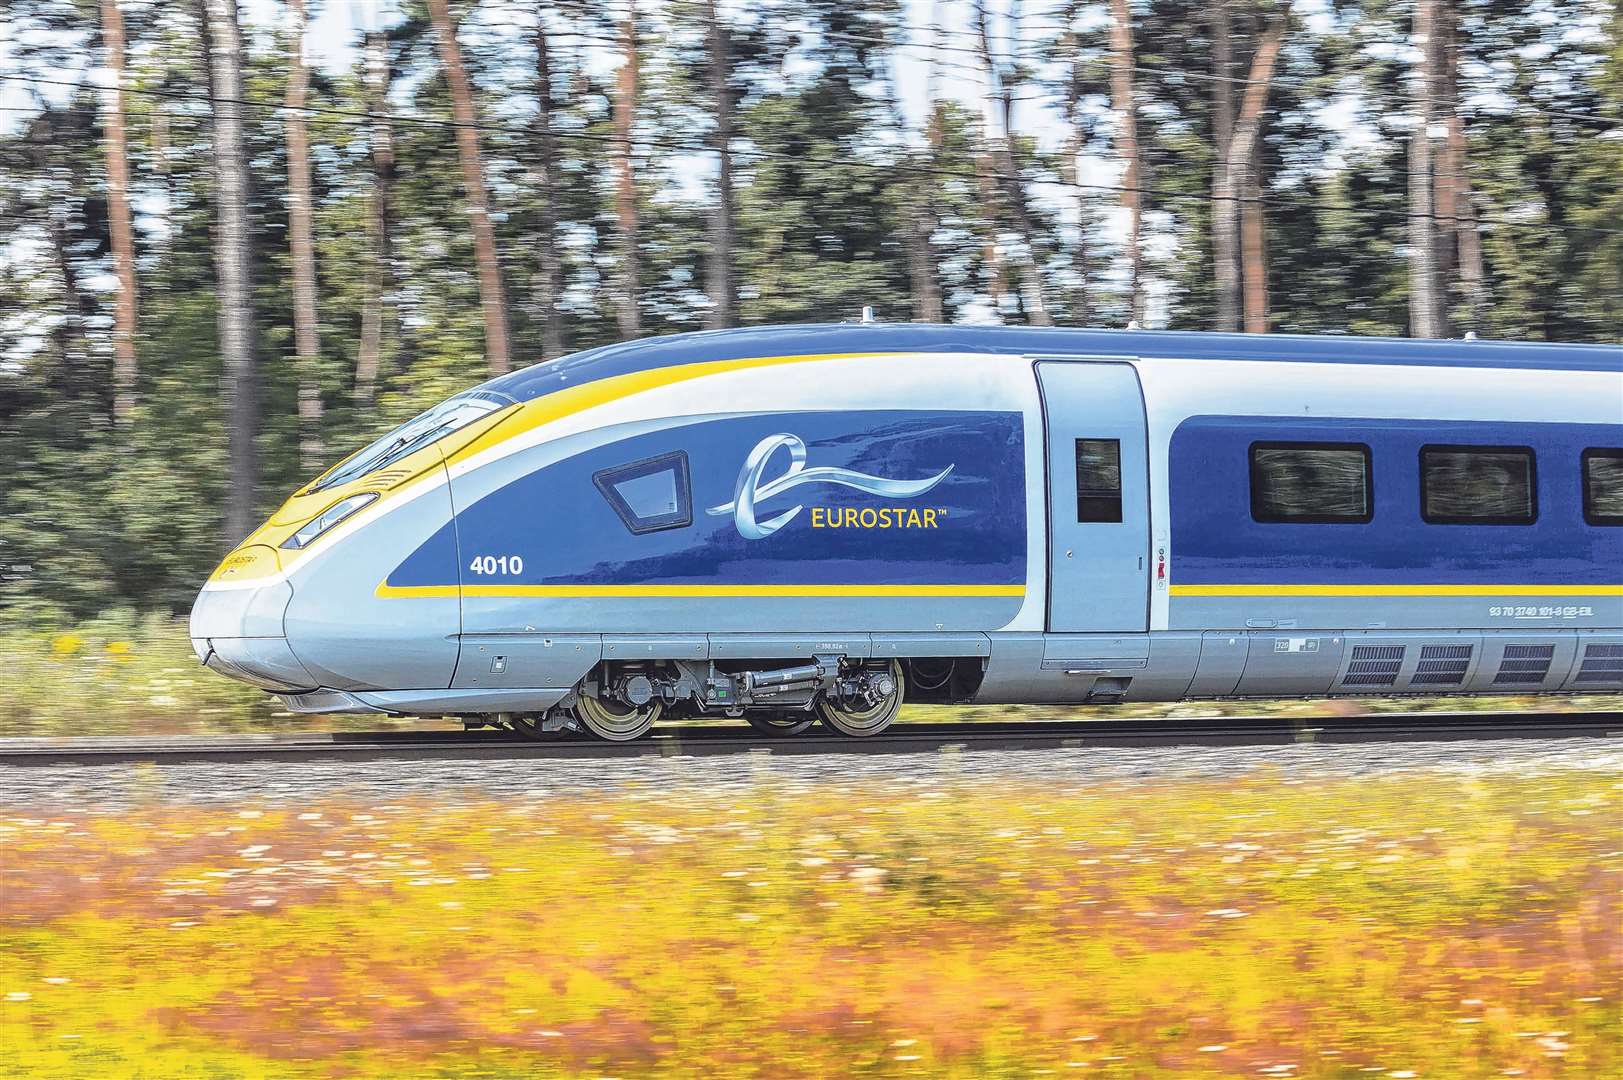 Eurostar services from its Kent stations are on hold until 2022